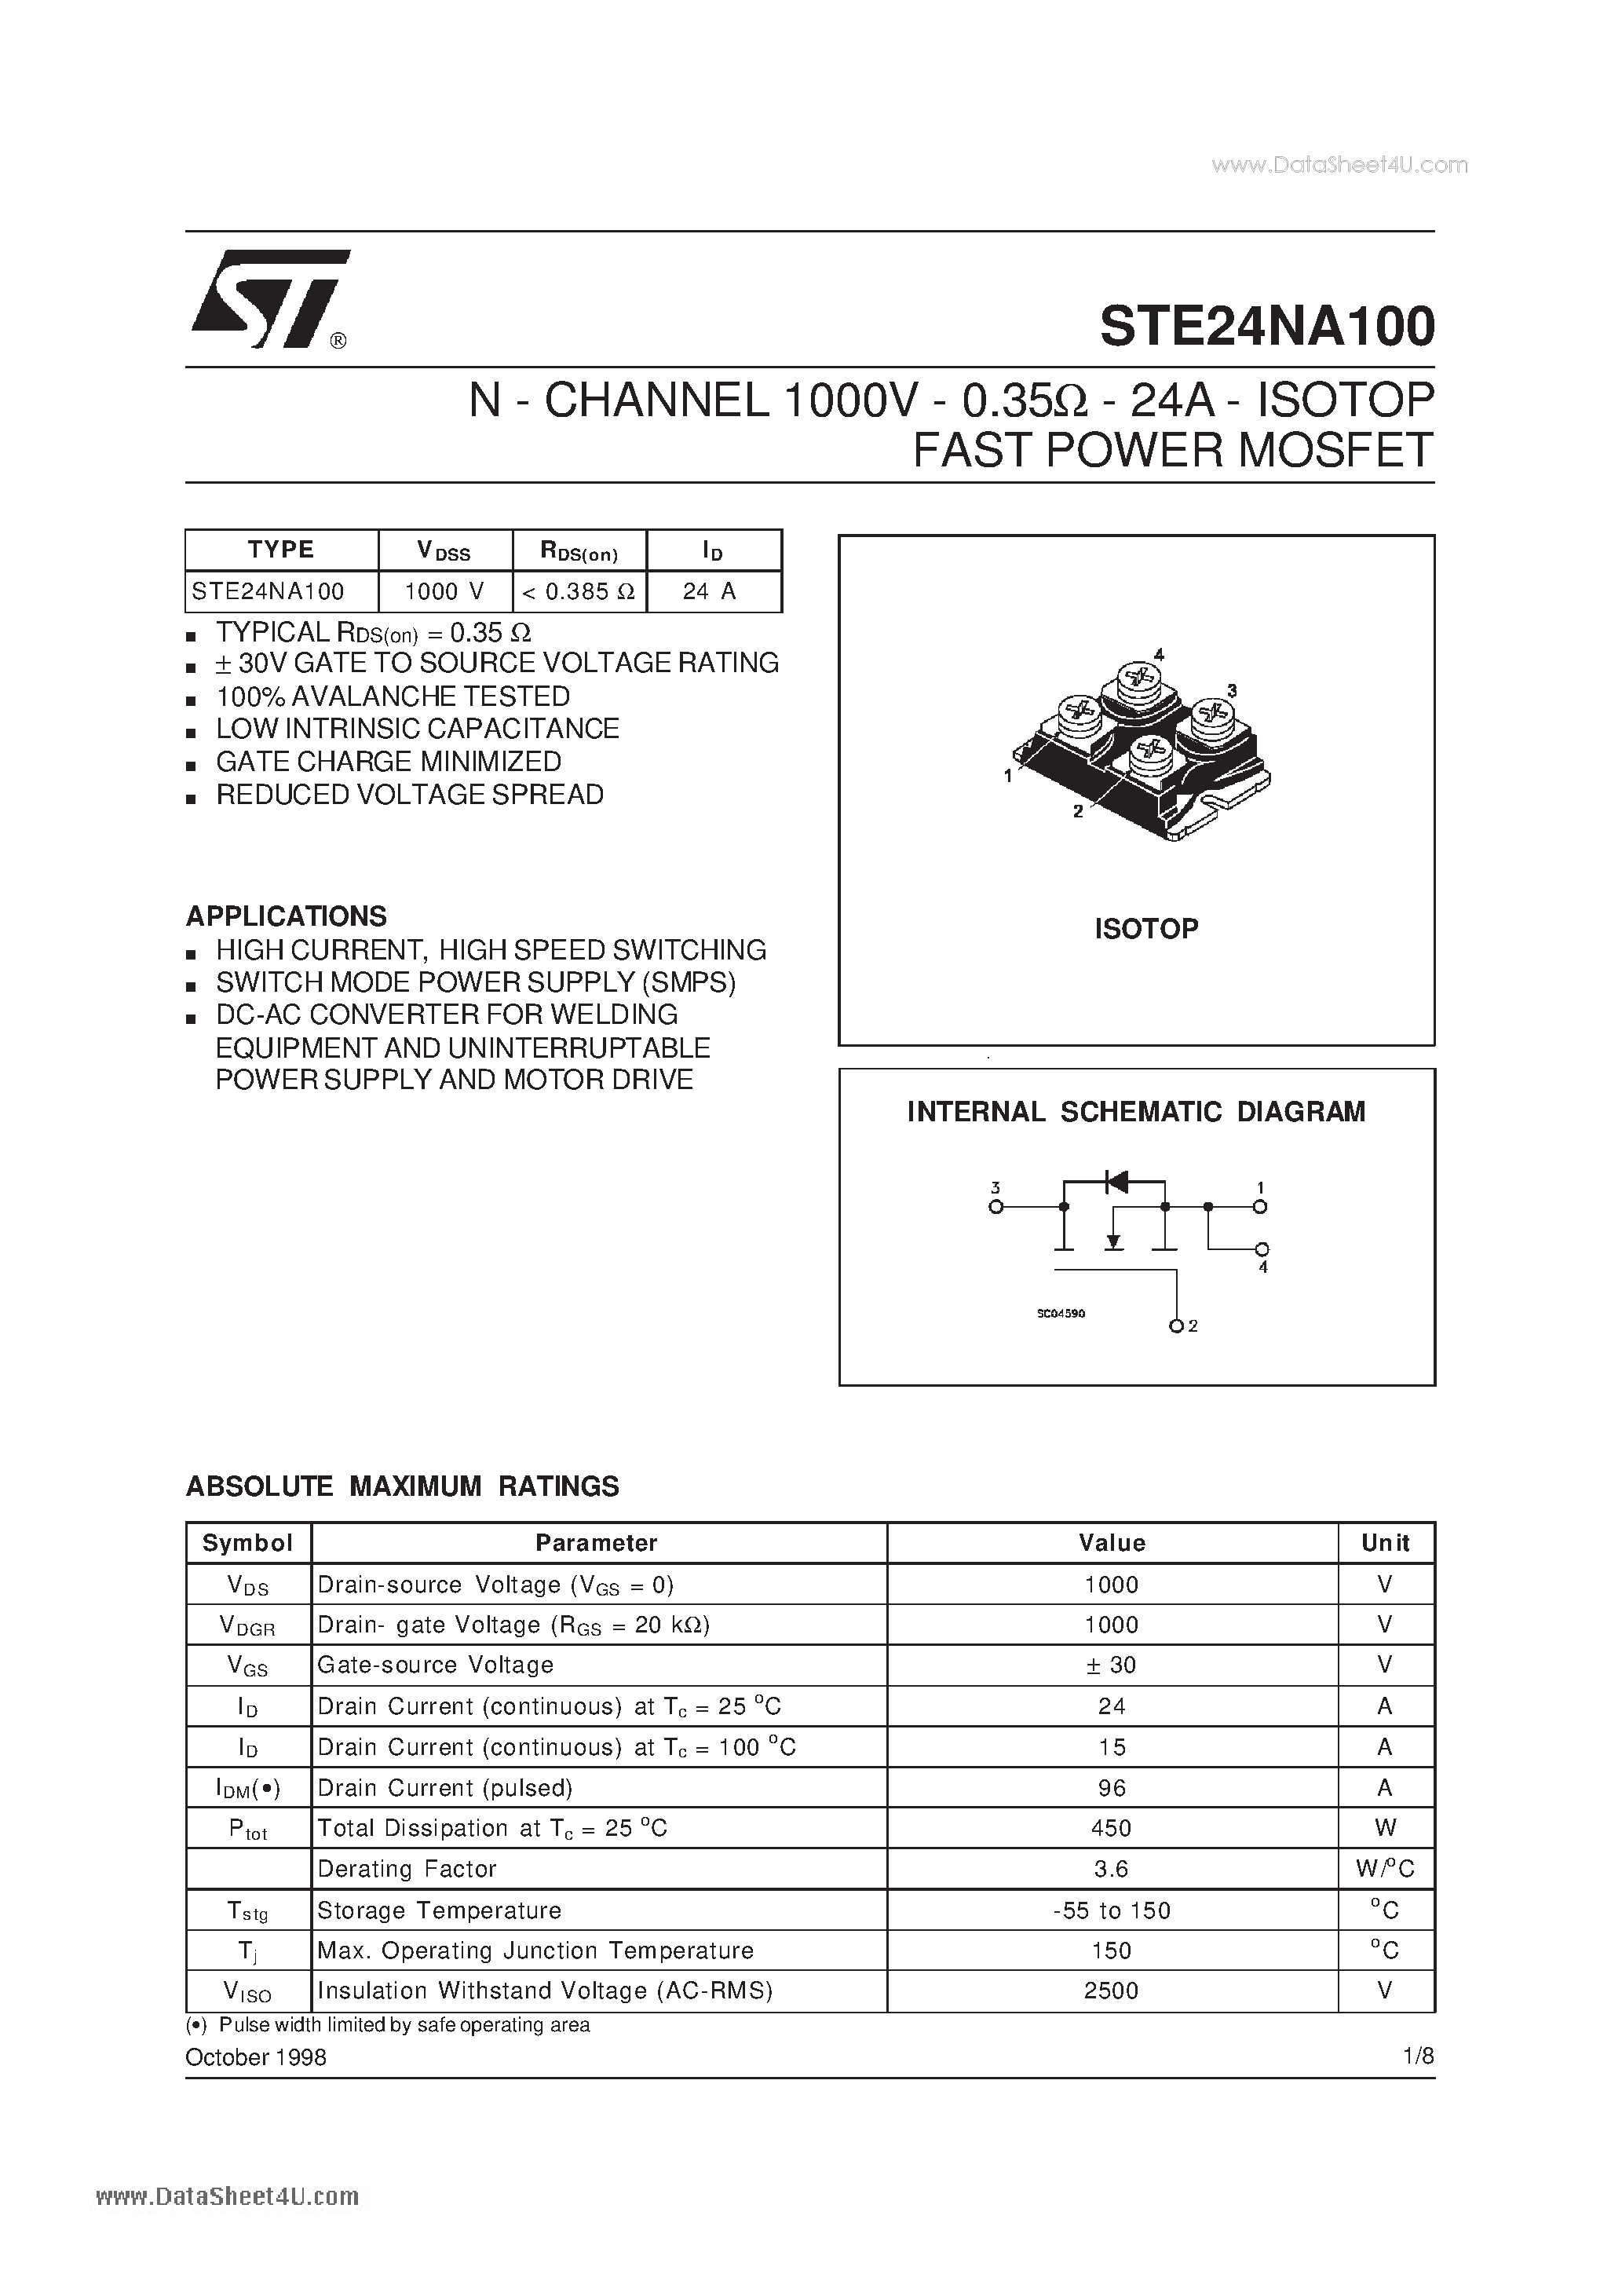 Datasheet STE24NA100 - ISOTOP FAST POWER MOSFET page 1